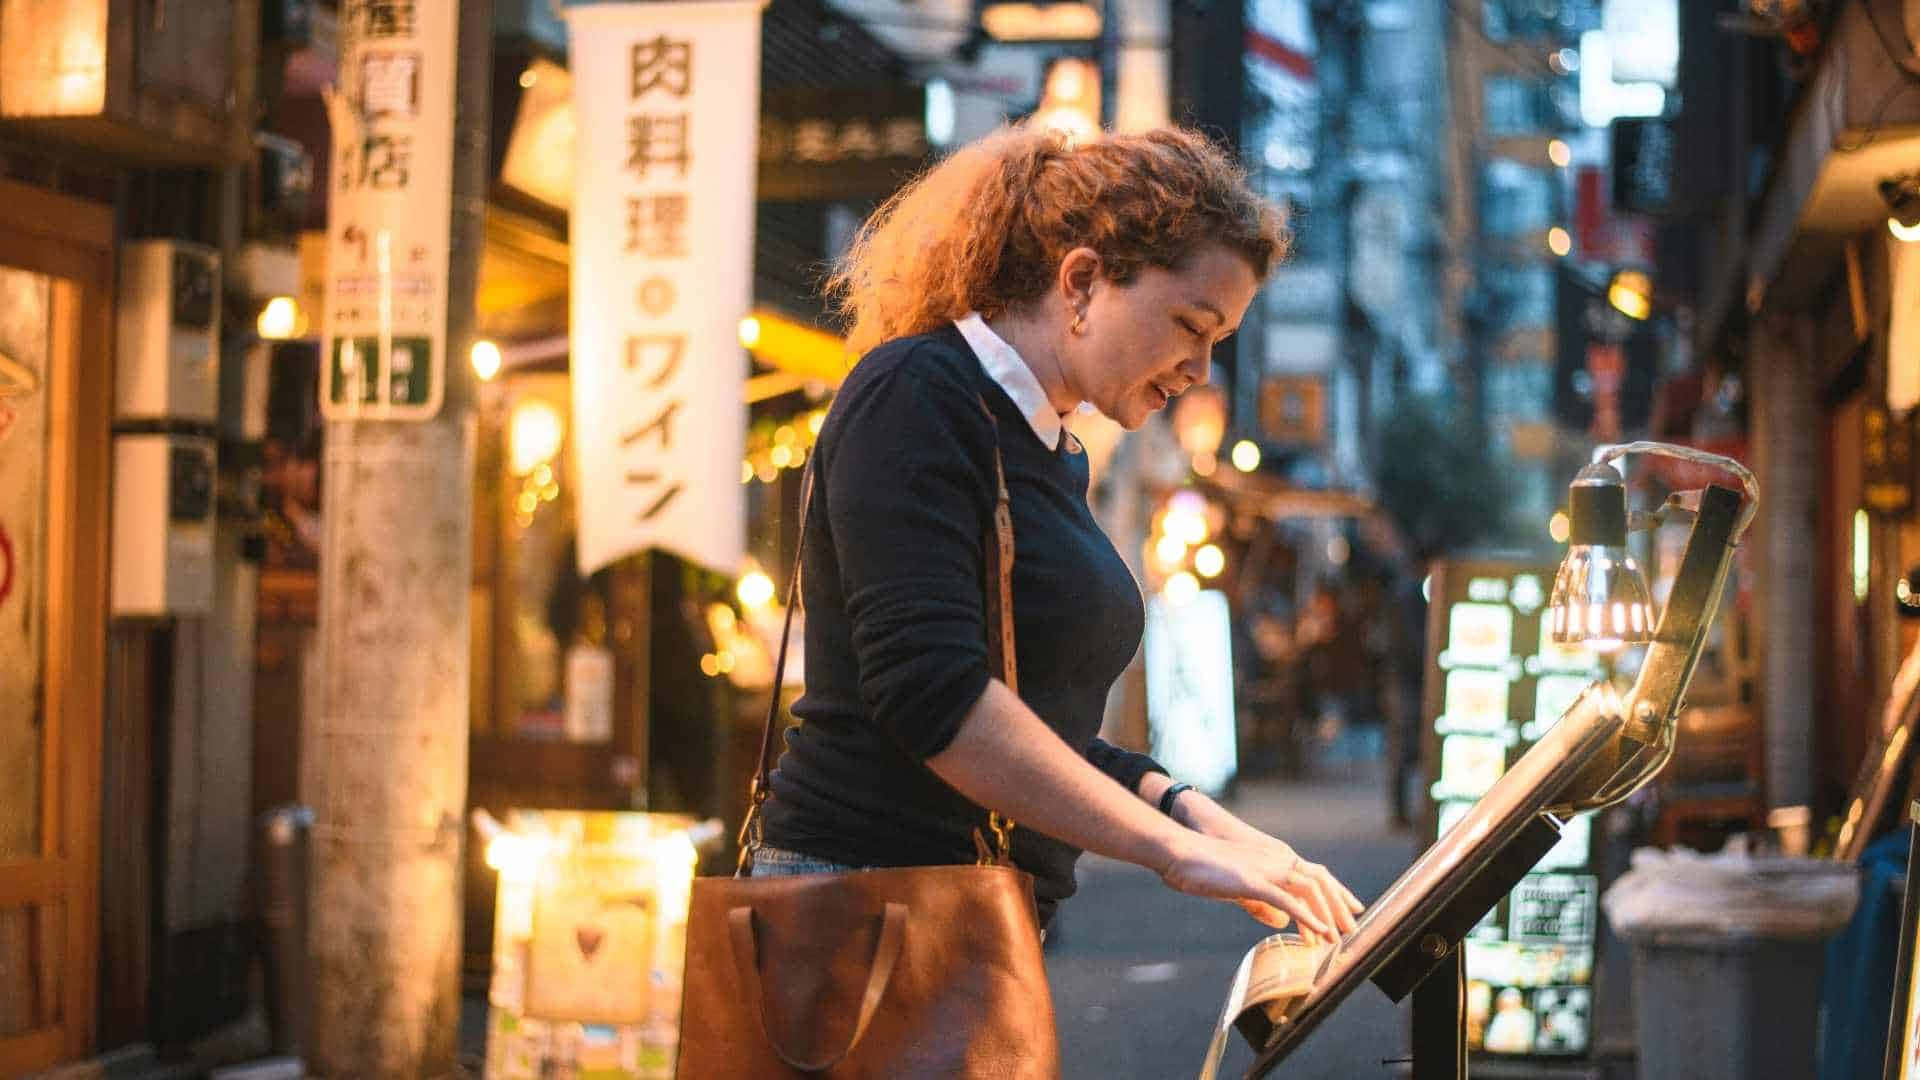 Experience the hustle and bustle of Tokyo, Japan